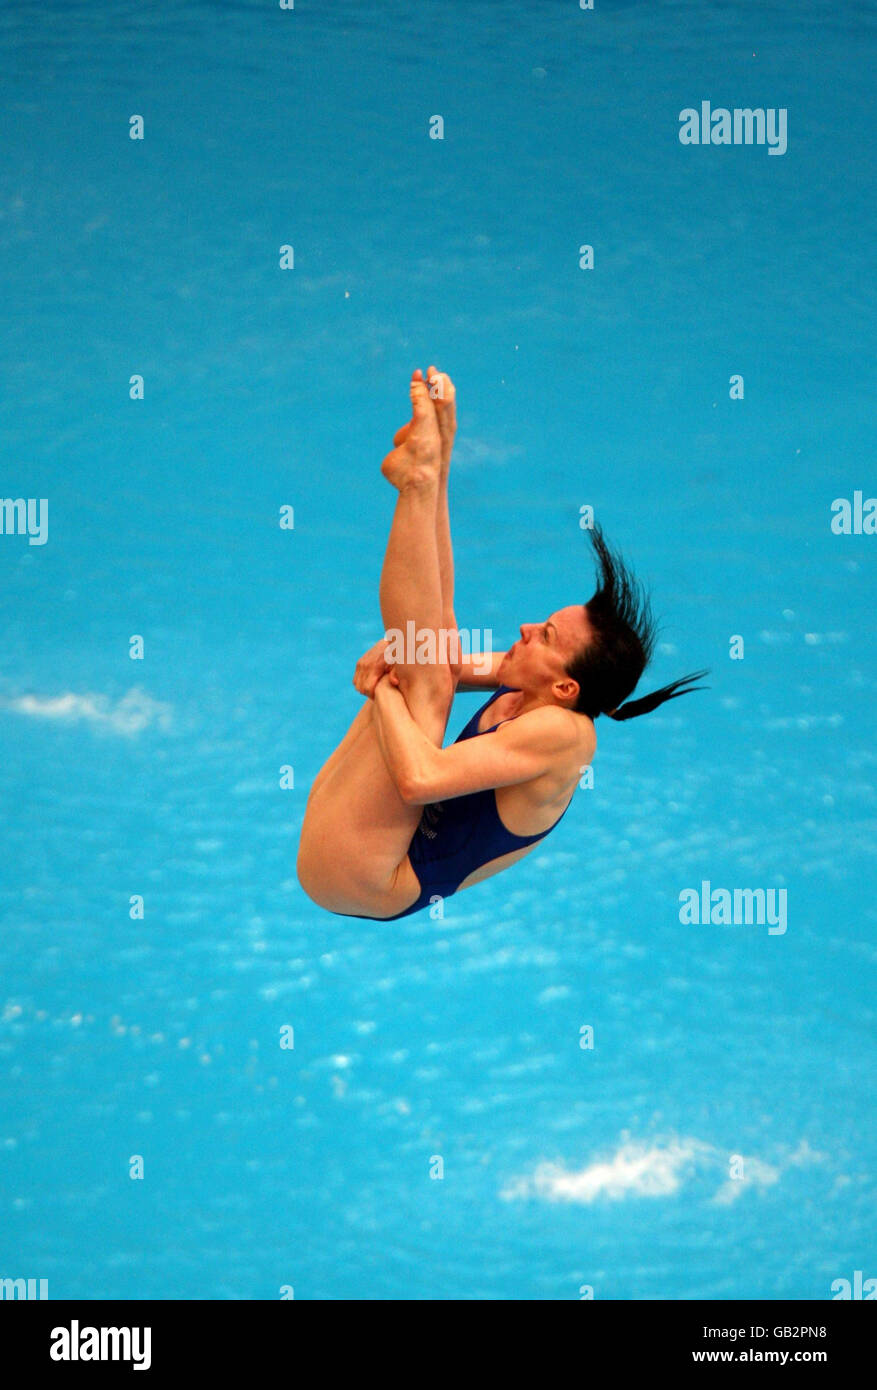 Great Britain's Rebecca Gallantree during the women's 3 metre springboard preliminary round at the Beijing National Aquatic Center during the 2008 Beijing Olympic Games in China. Stock Photo